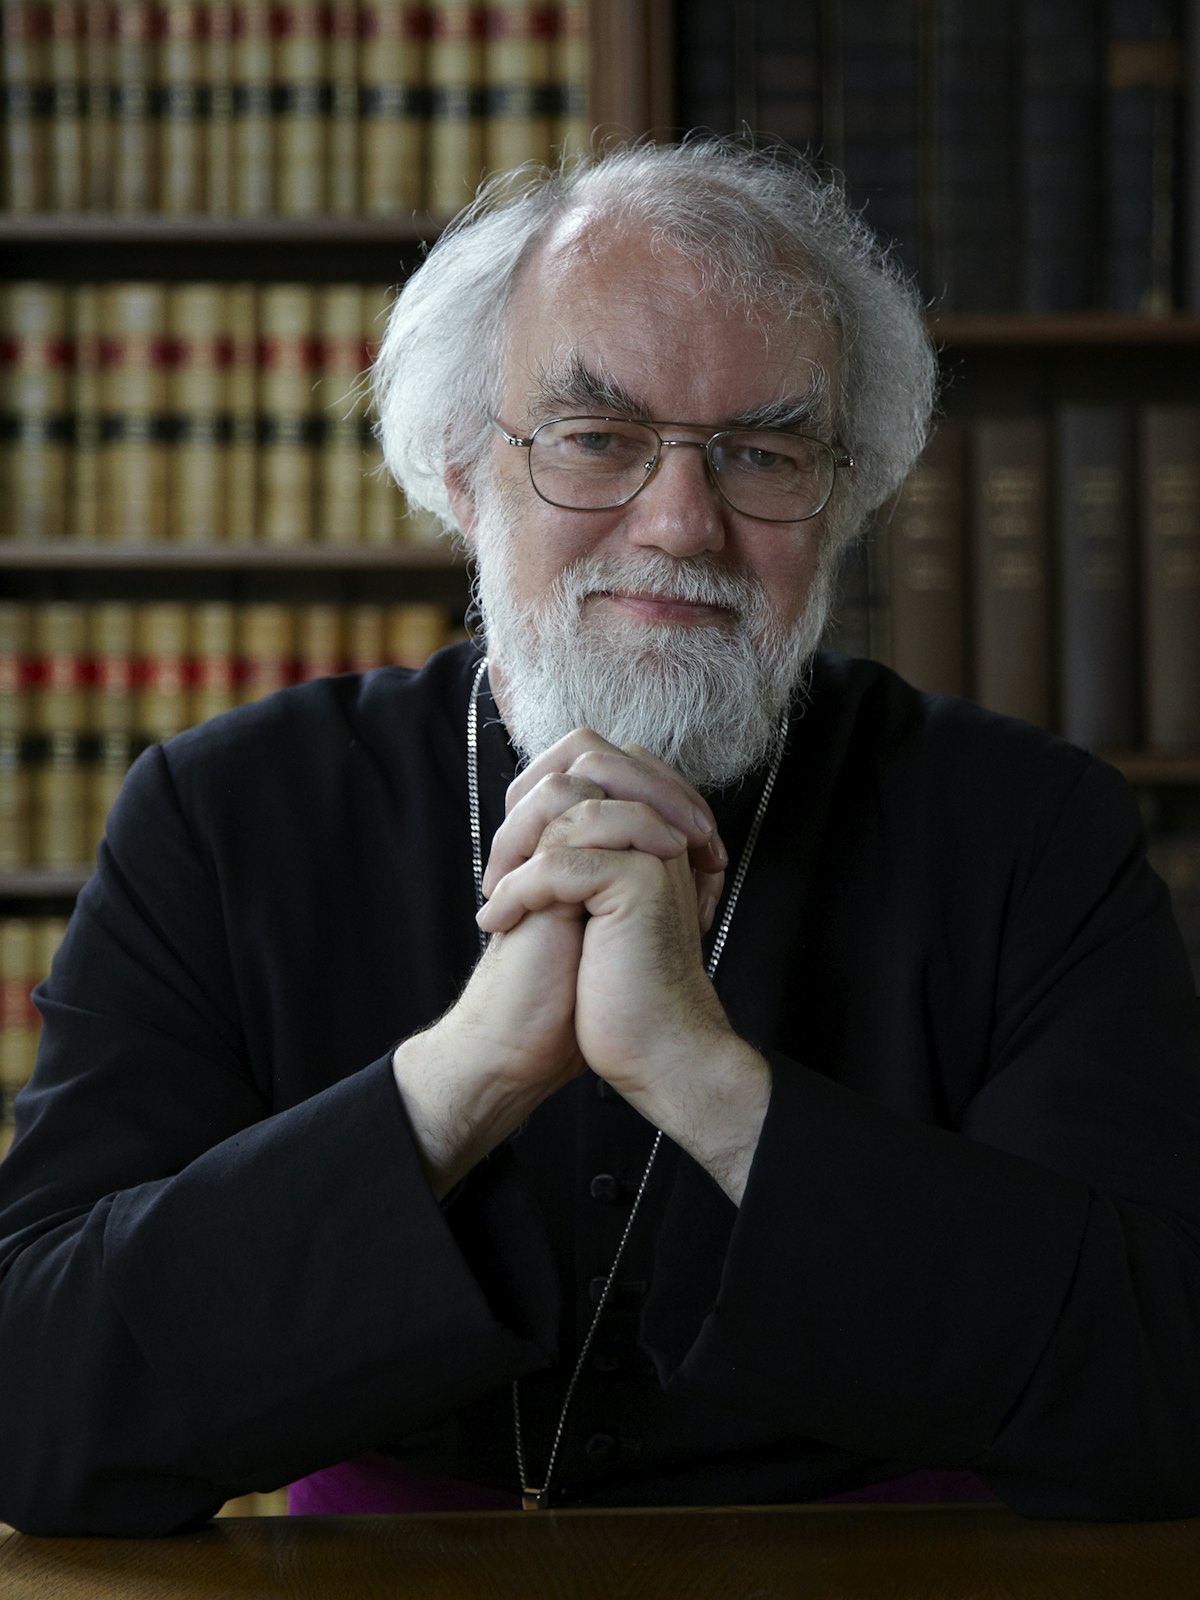 Dr. Rowan Williams, former archbishop of Canterbury. As the archbishop of Canterbury, Dr. Williams was the most senior bishop of the worldwide Anglican Communion. He has called Ayatollah Tehrani's gift to the Baha'is an act of "immense significance". (Photo courtesy of Magdalene College)